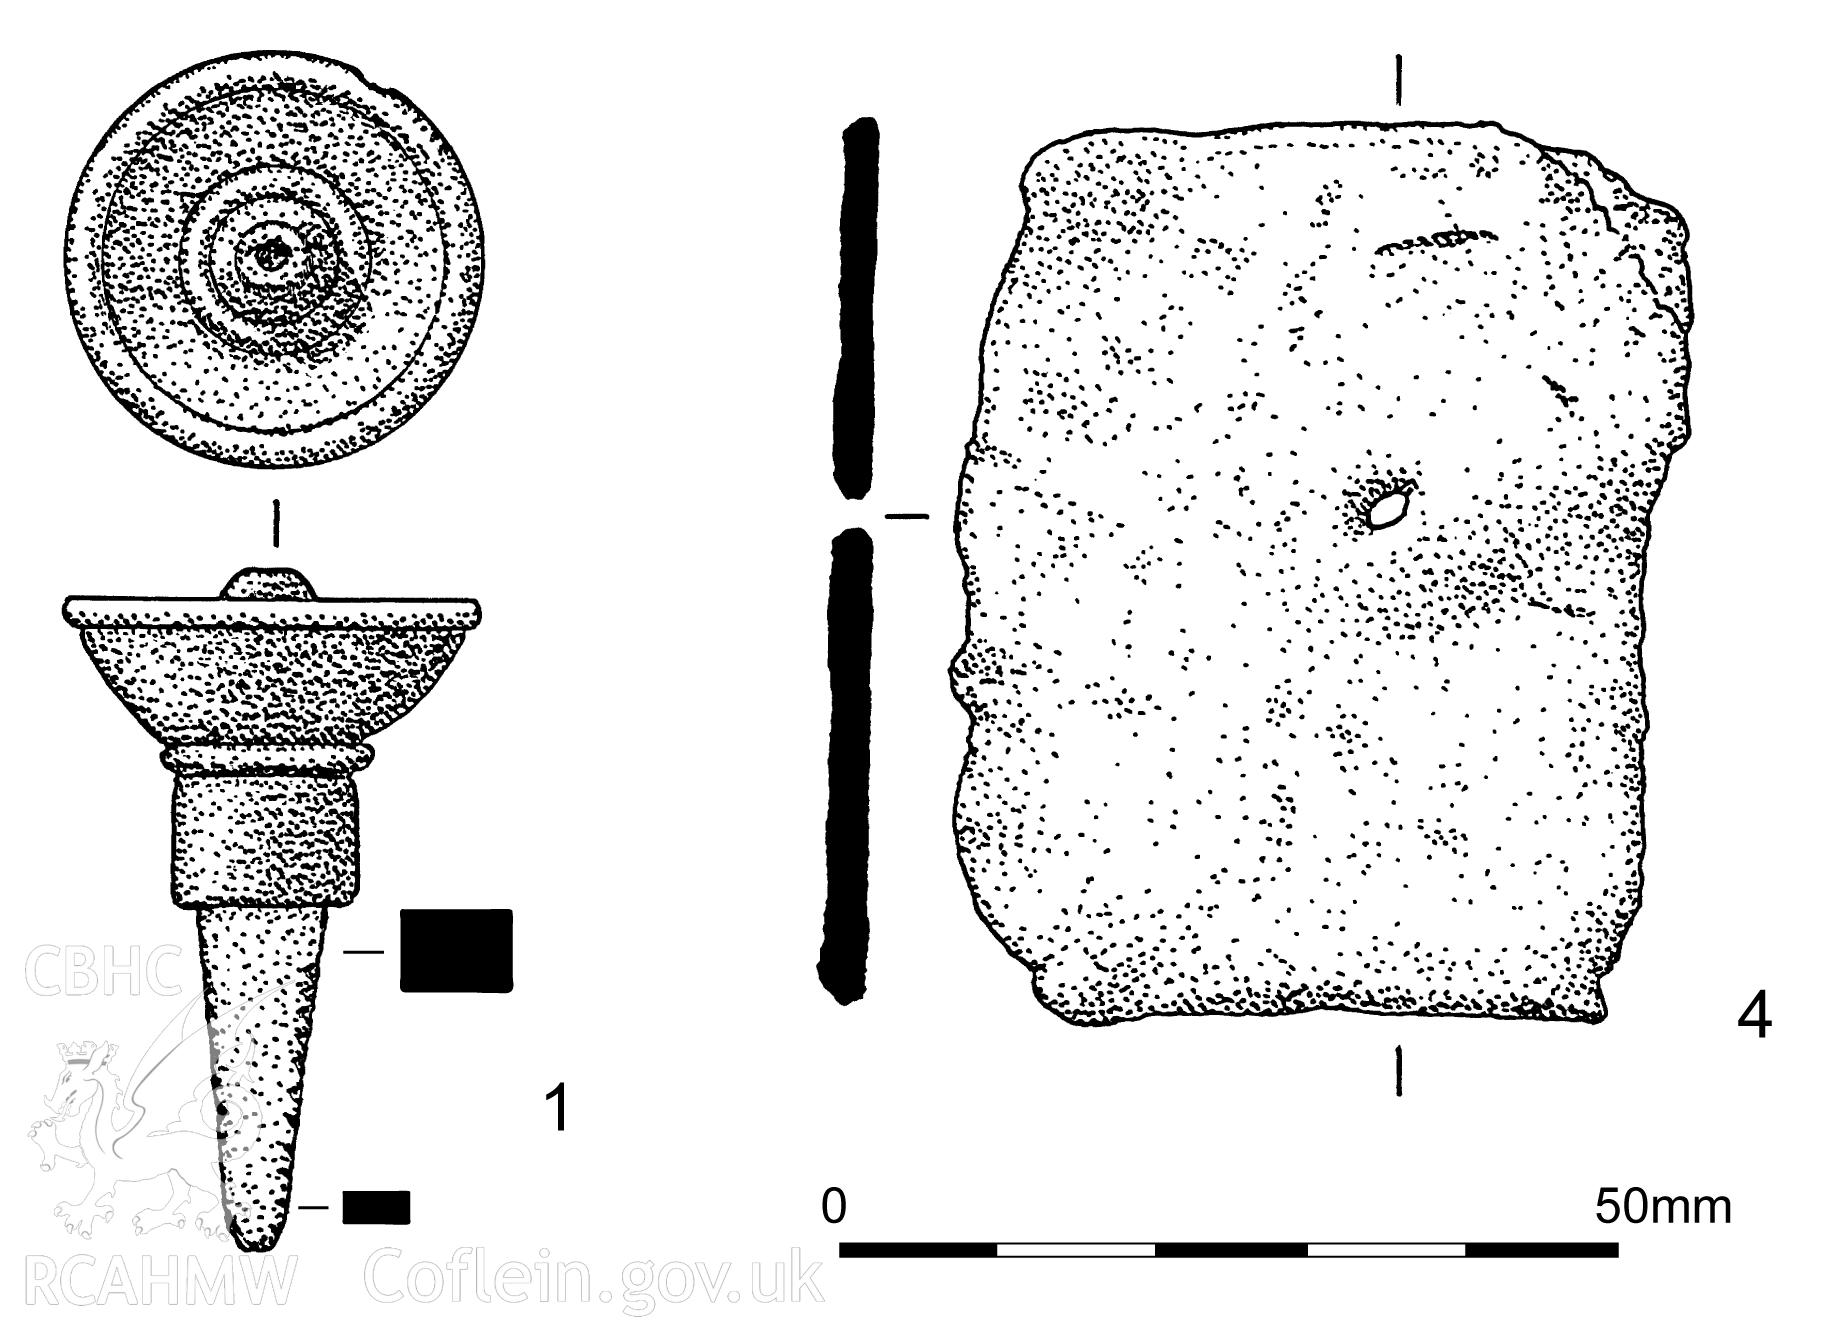 Arch Camb 167 (2018) 143-219. "The Romano-British villa at Abermagwr, Ceredigion: excavations 2010-2015" by Davies and Driver. Fig 18 Roman metalwork, scale 2:3. Drawings by Ian Dennis.